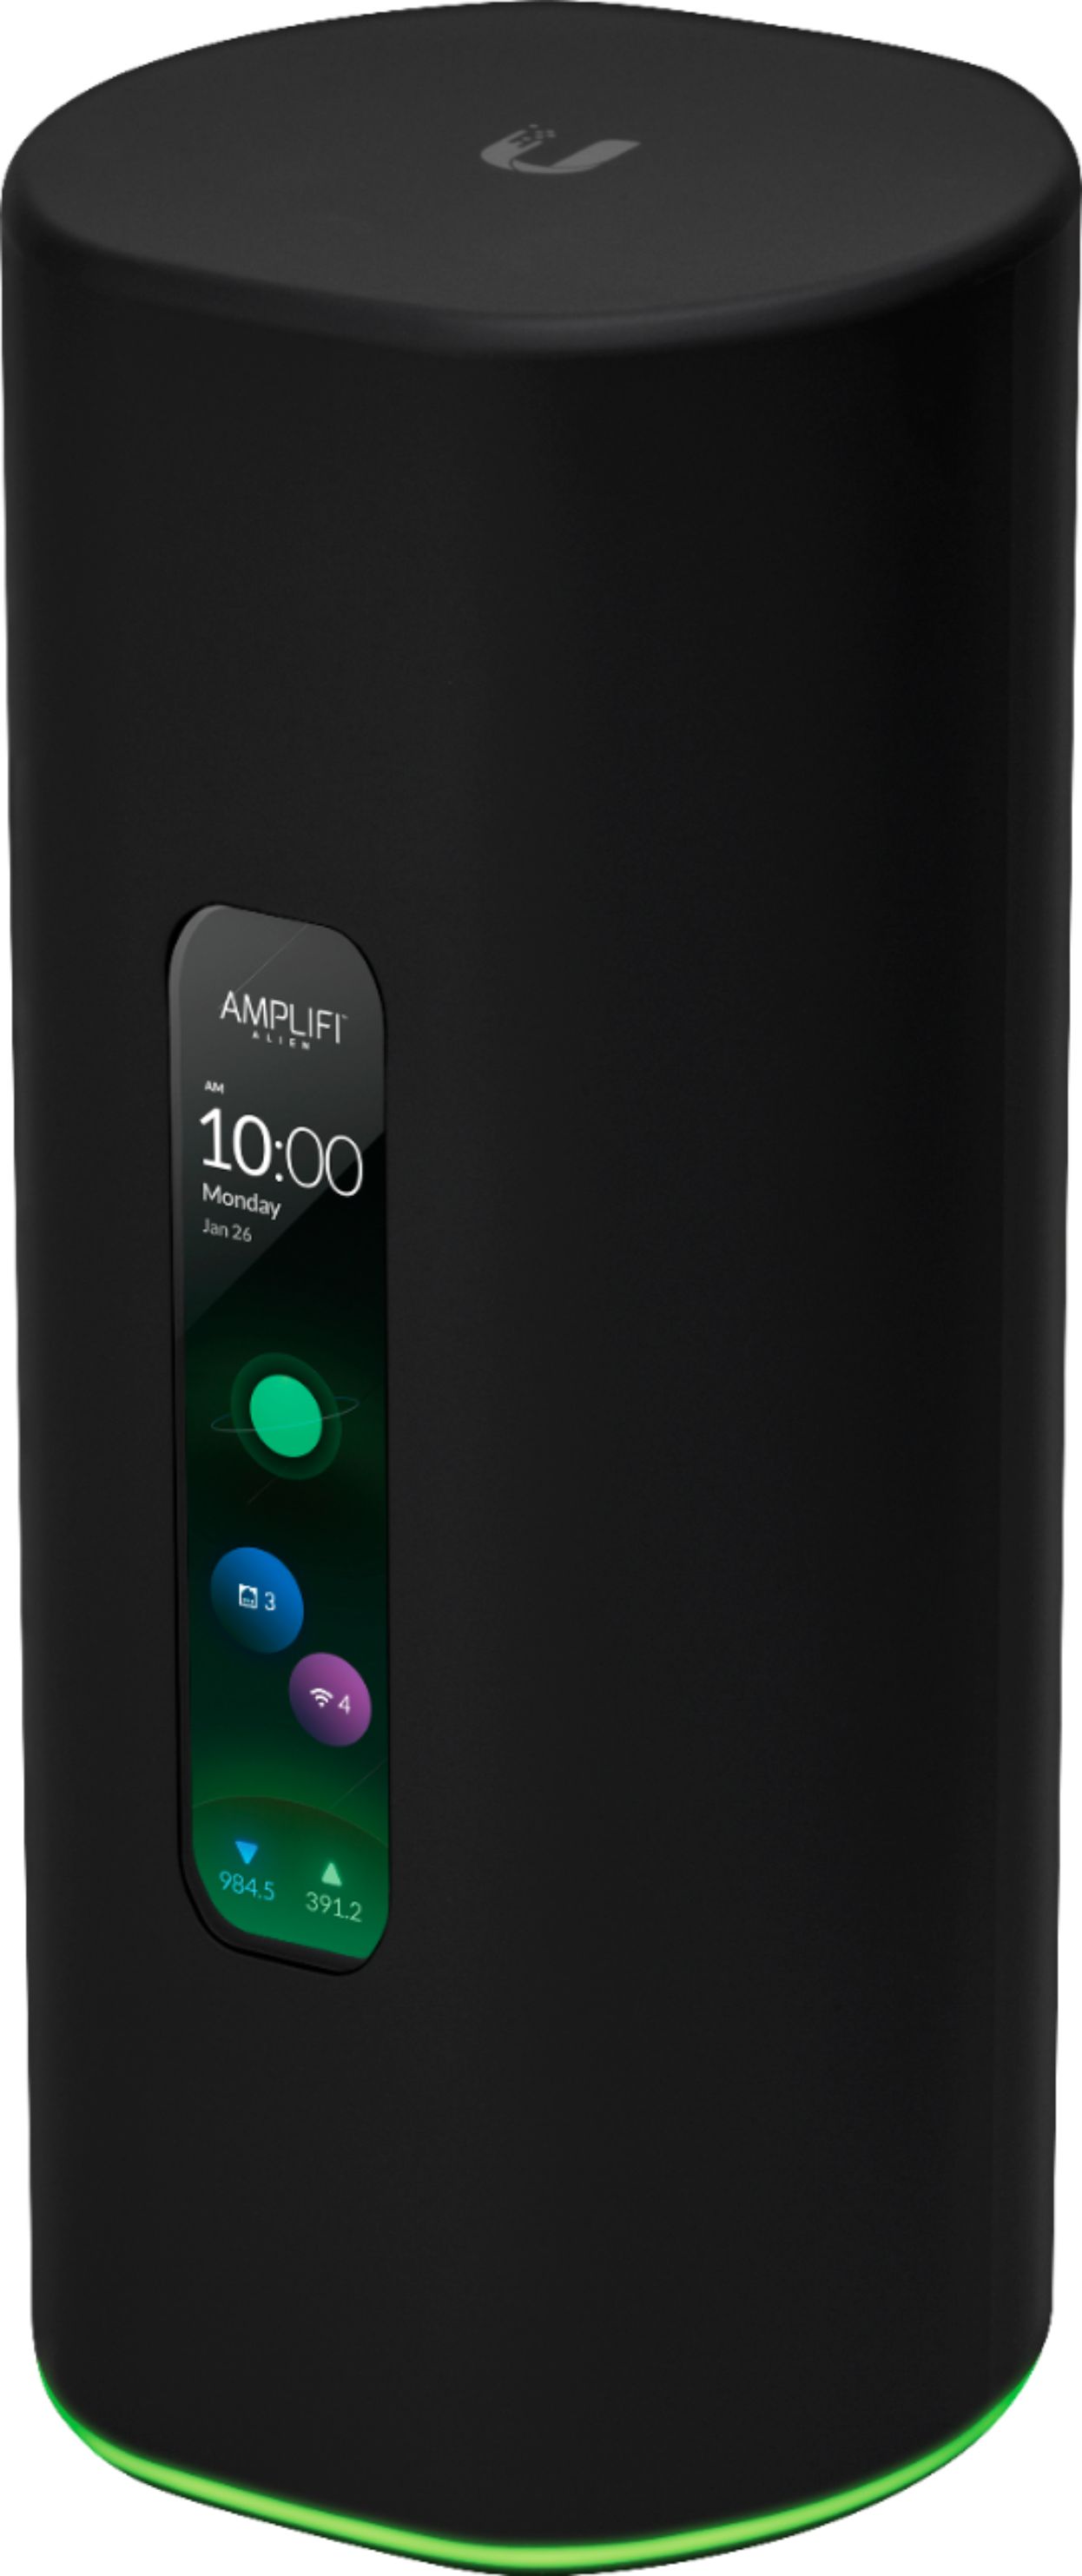 AmpliFi Alien review: This Wi-Fi 6 mesh router is futuristic, but not  future-proof - CNET